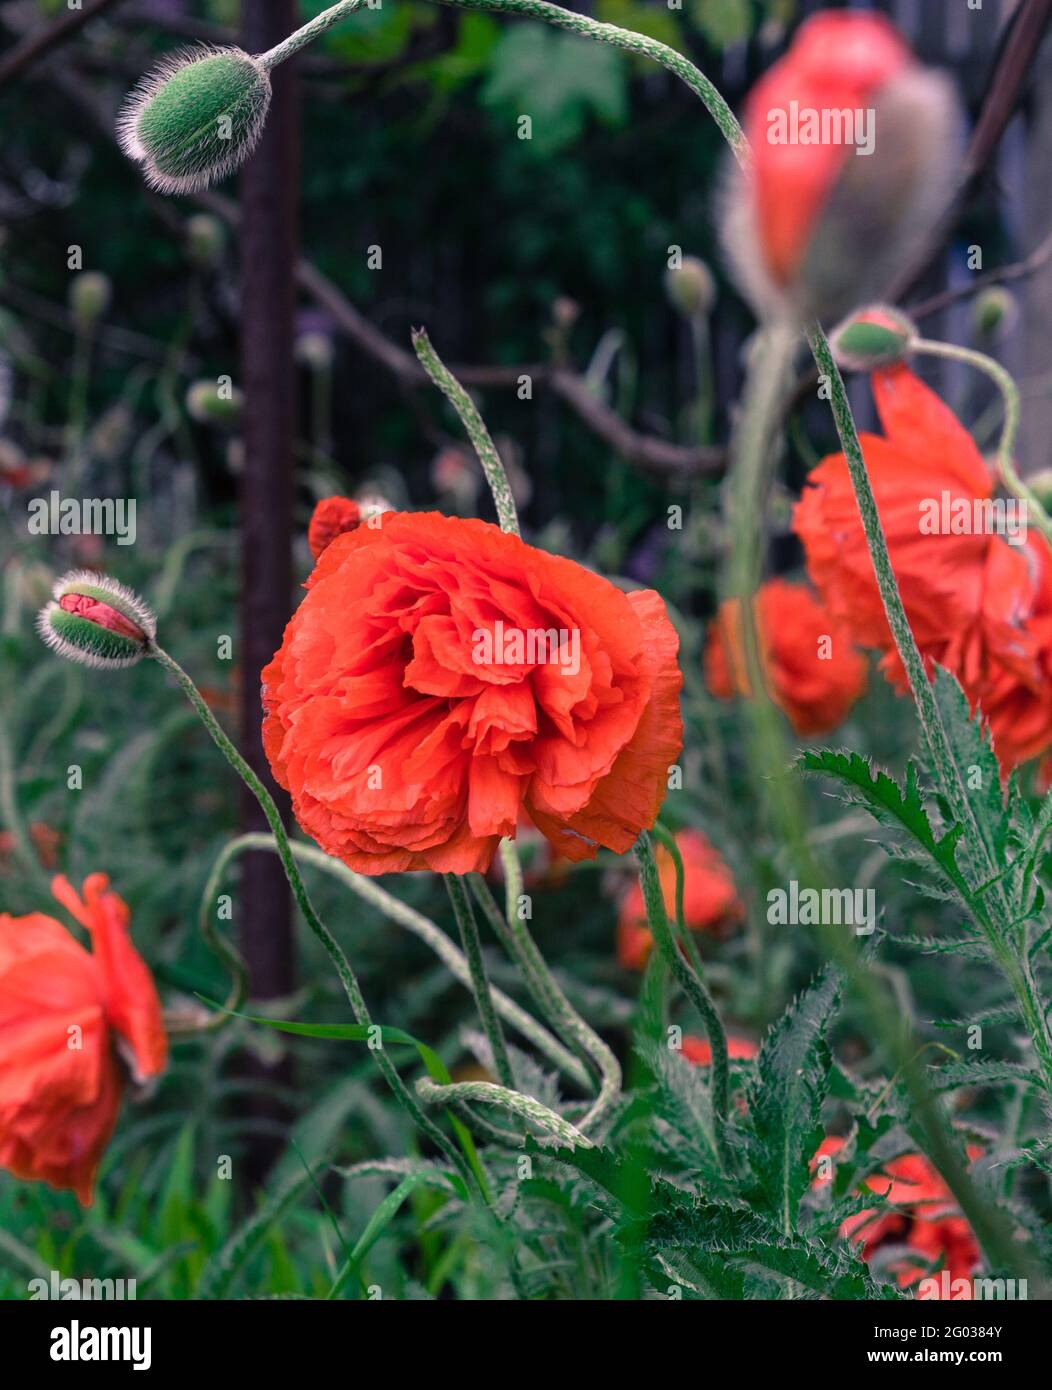 Beautiful red poppies and buds in the garden. Selective focus. Red flowers in the green grass. Countryside flowers Stock Photo